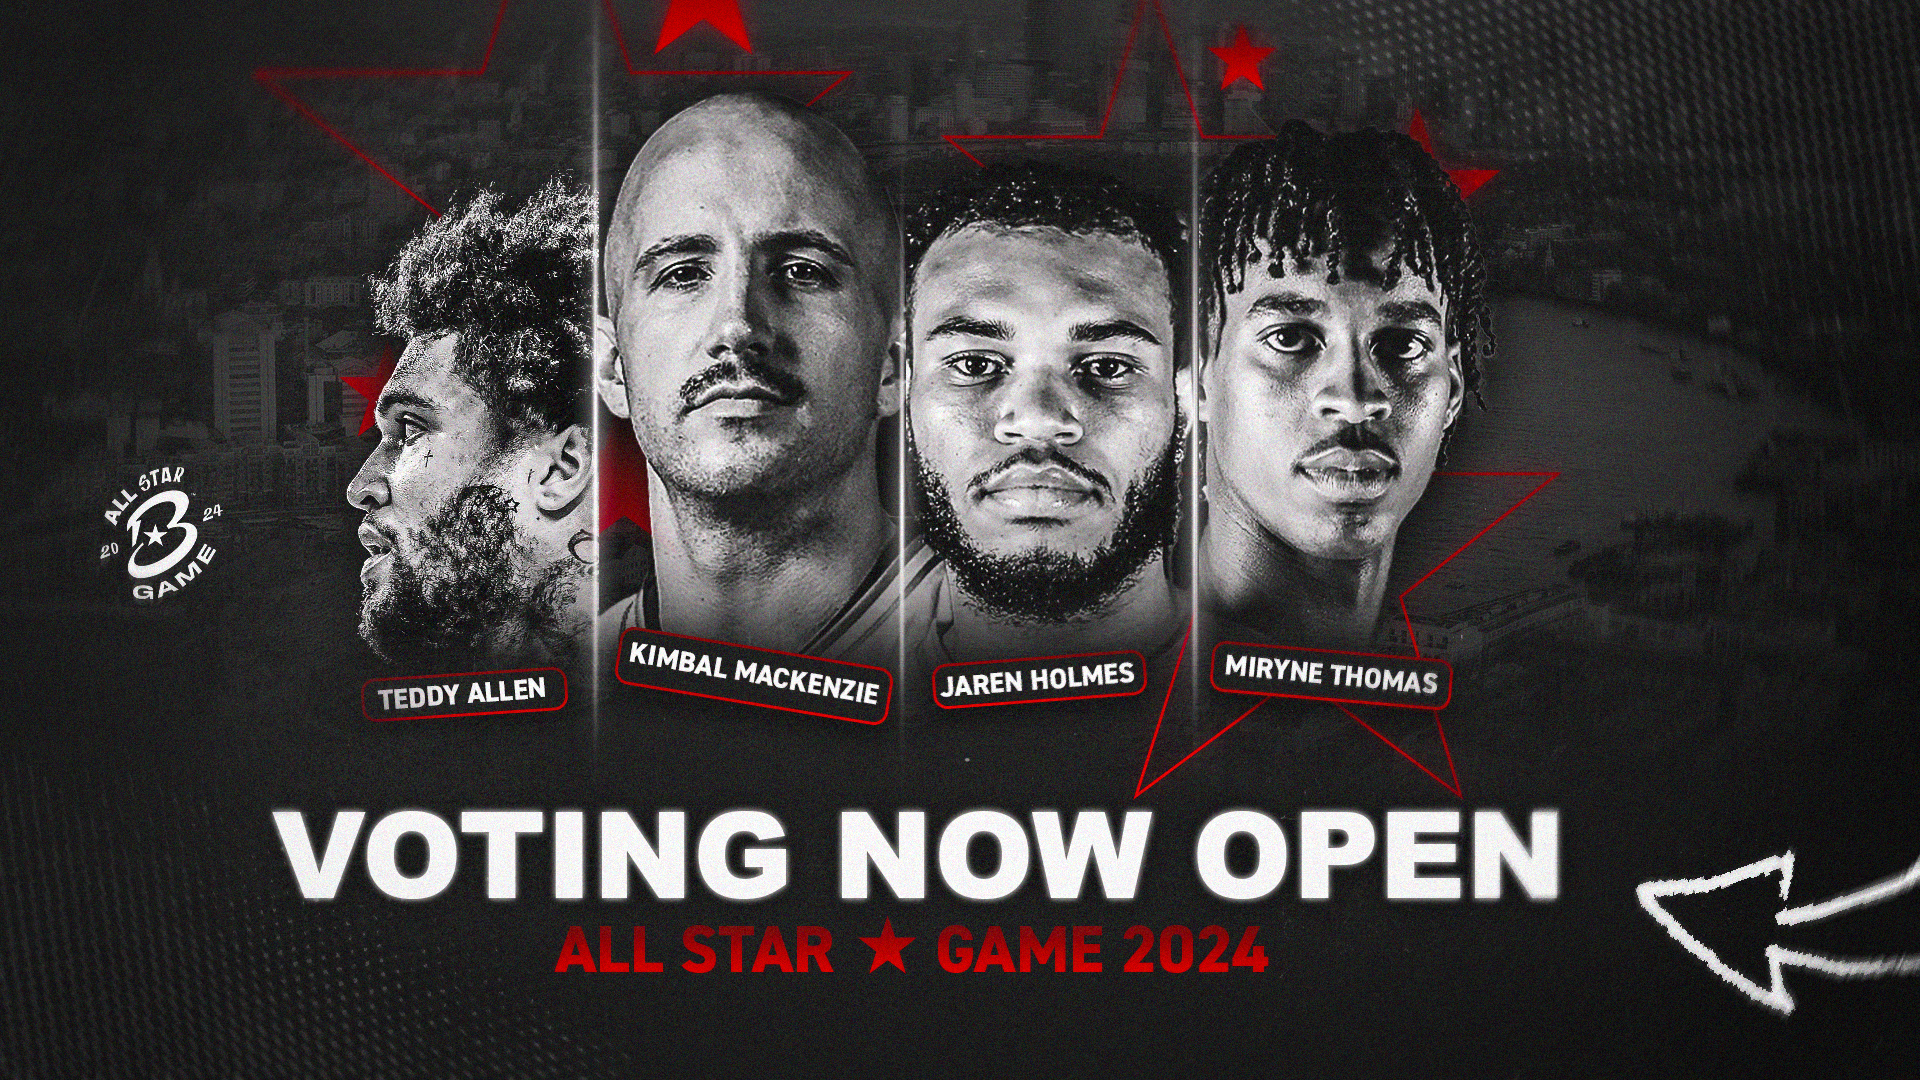 British Basketball League Launches All-Star Game Voting for North vs South Clash